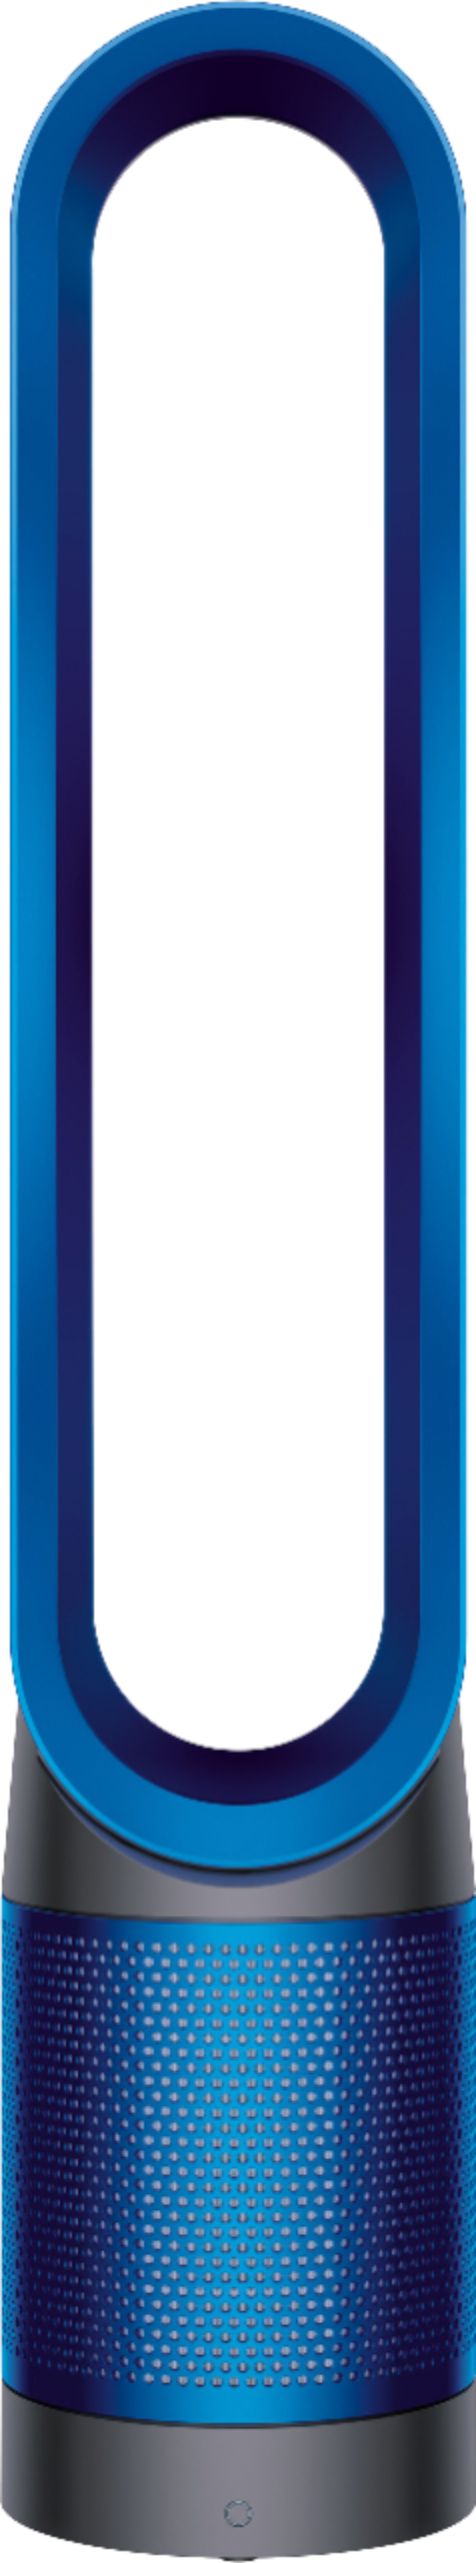 Dyson – TP01 Pure Cool Tower 800 Sq. Ft. HEPA Air Purifier and Fan – Iron/Blue